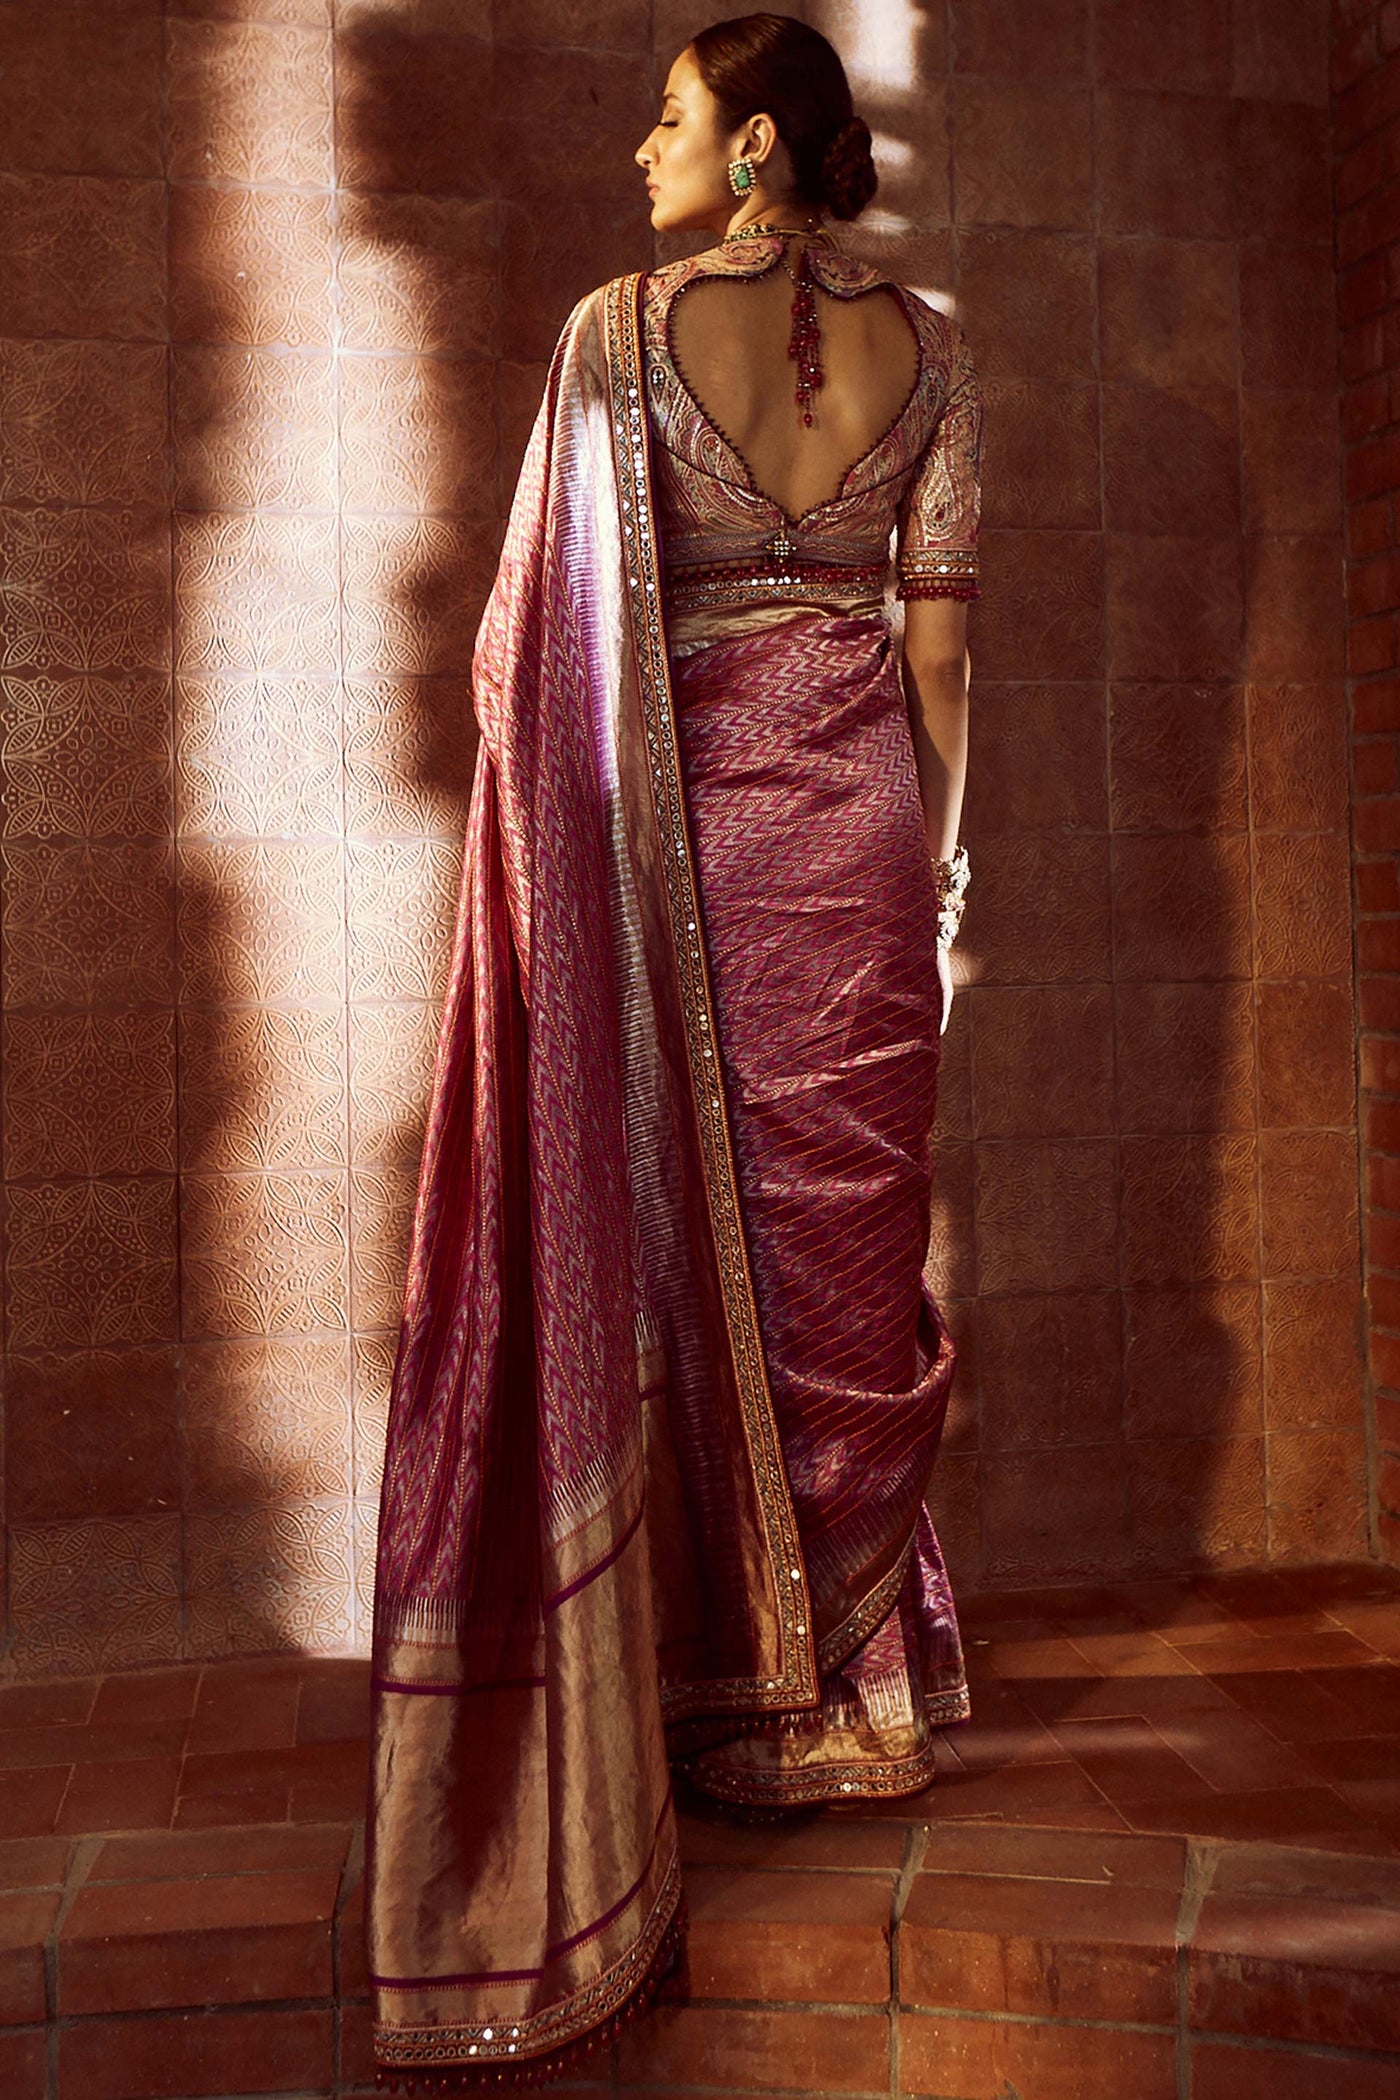 Tarun Tahilaini Silk Ikat Saree With Hand-Embroidered Mirror Border And Jamewar Blouse With Aari Embroidery, Embellished With Fringes magenta festive indian designer wear online shopping melange singapore